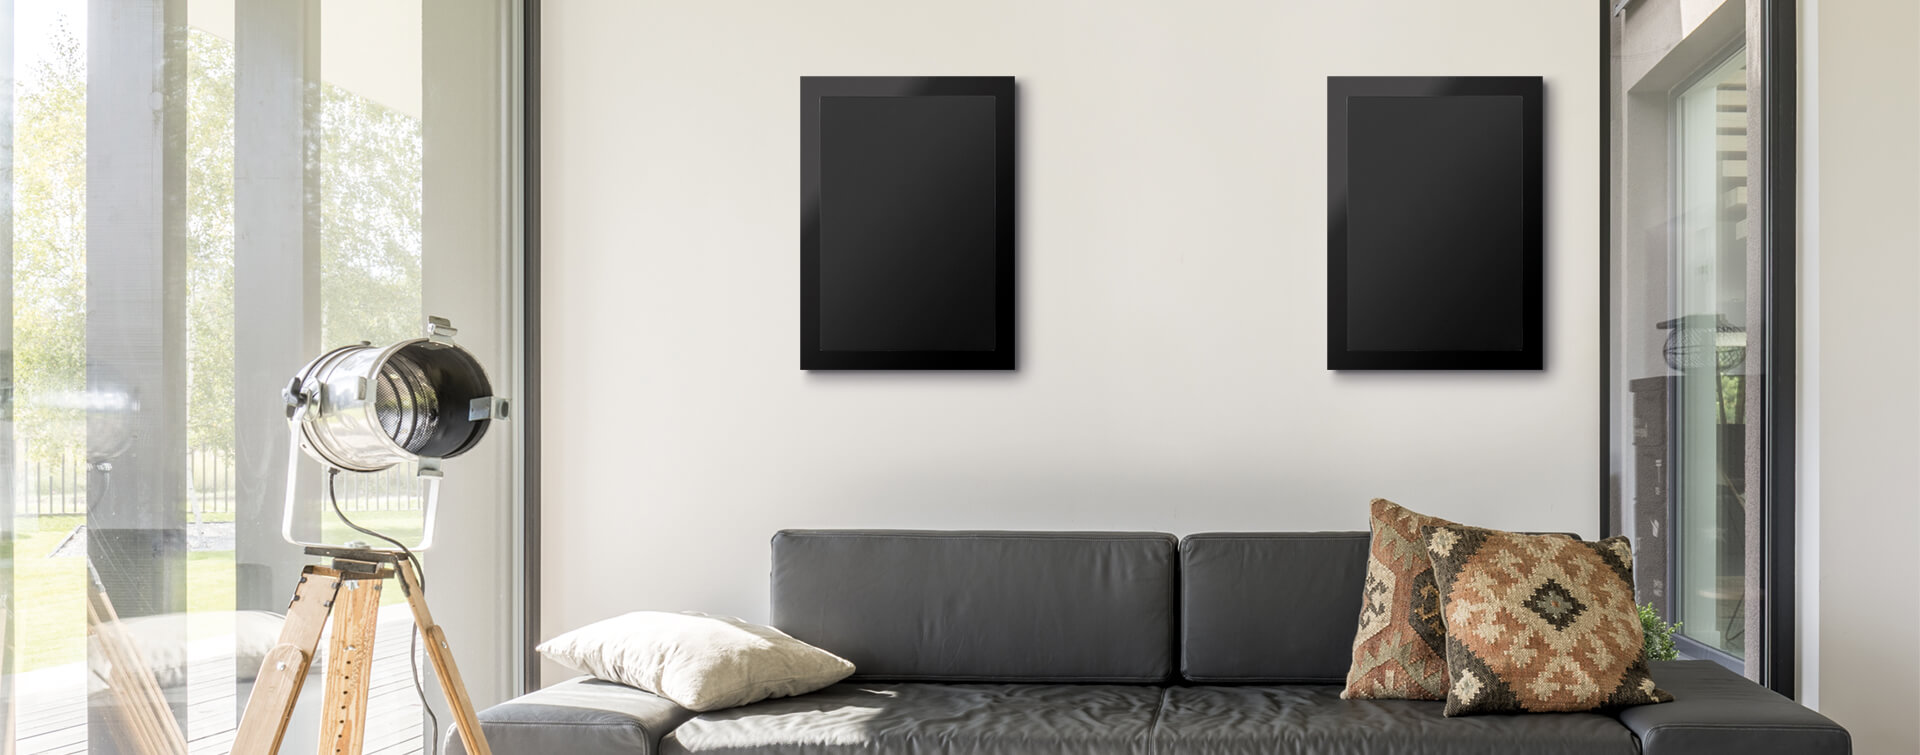 SoundFrame SF1 on-wall speakers.